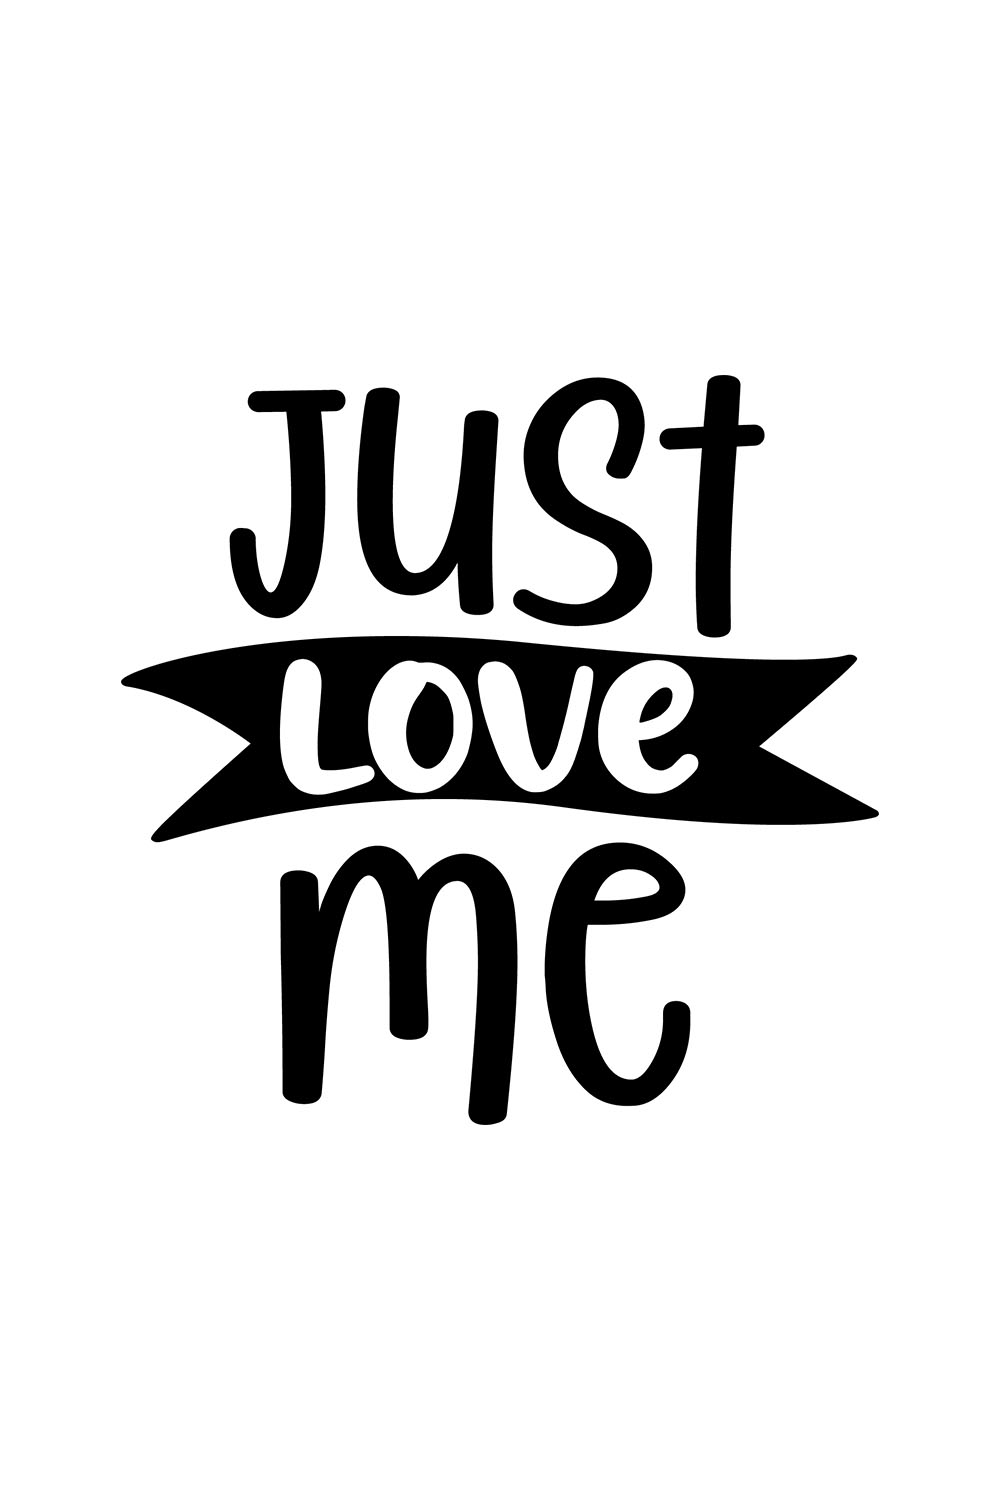 Image with exquisite black lettering for Just Love Me prints.